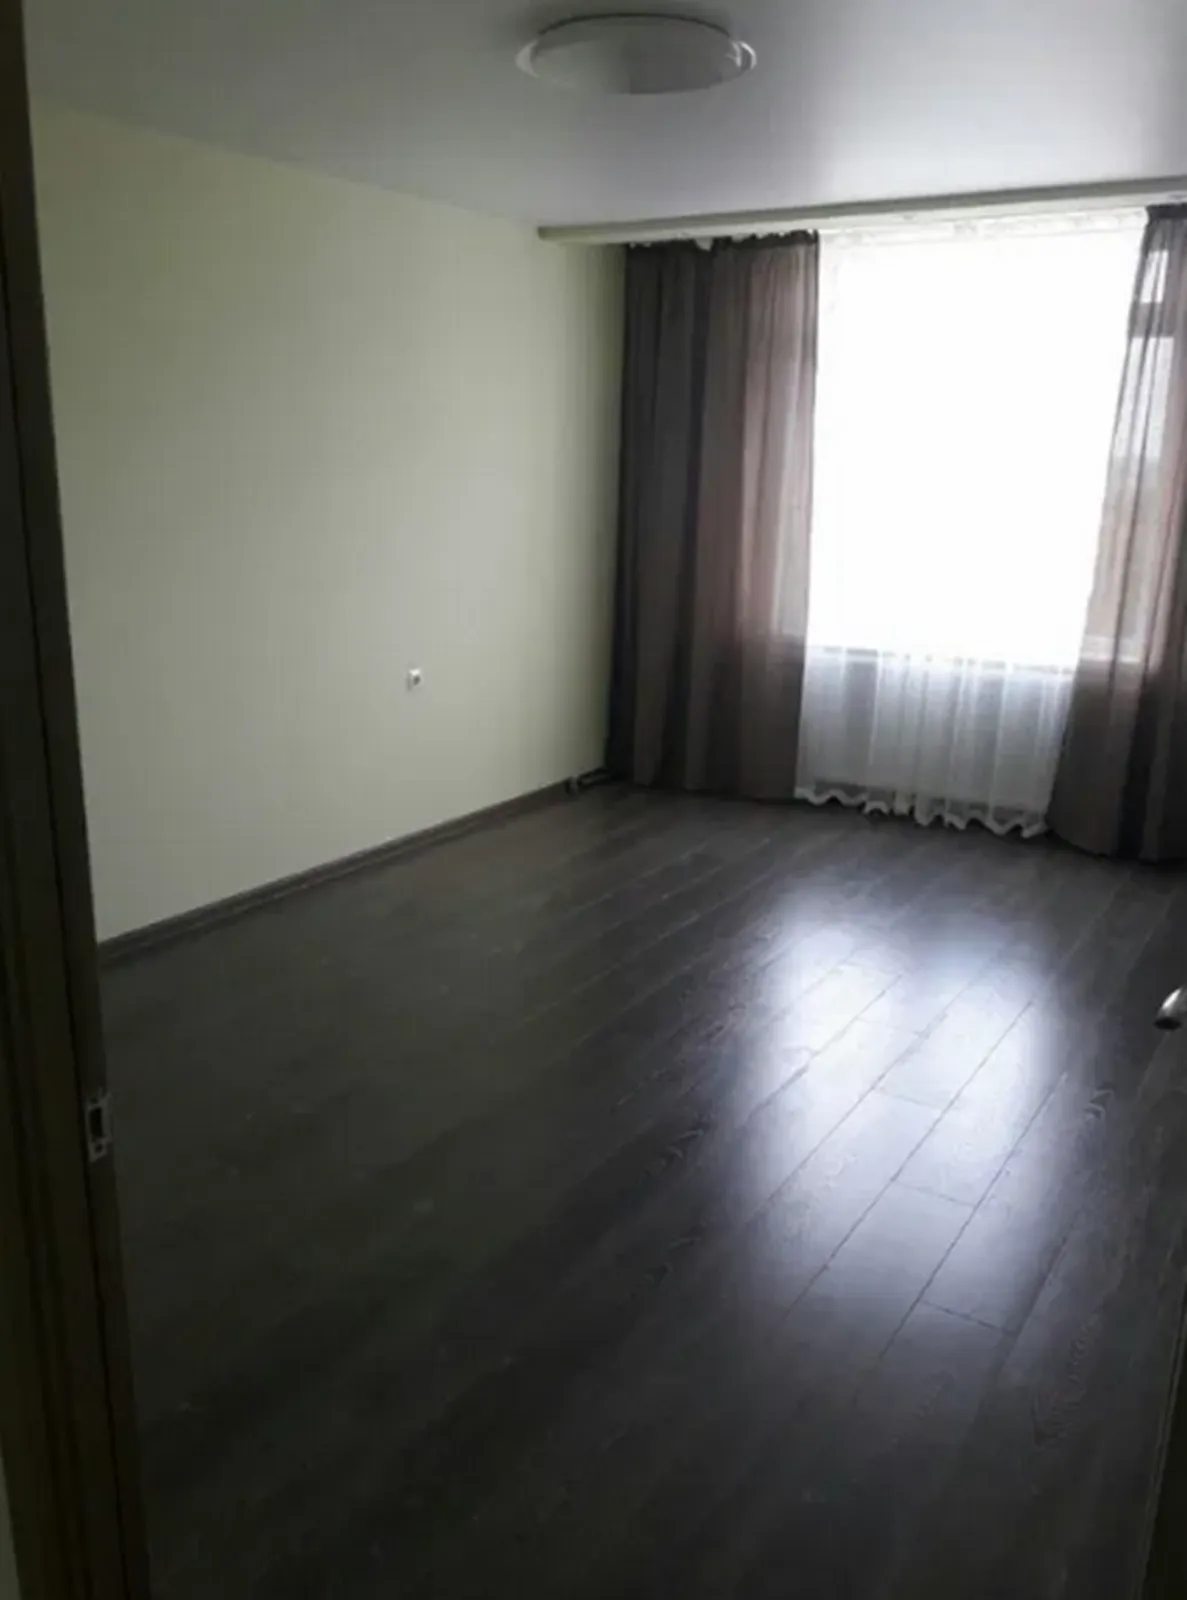 Apartments for sale. 2 rooms, 68 m², 11 floor/11 floors. Bam, Ternopil. 